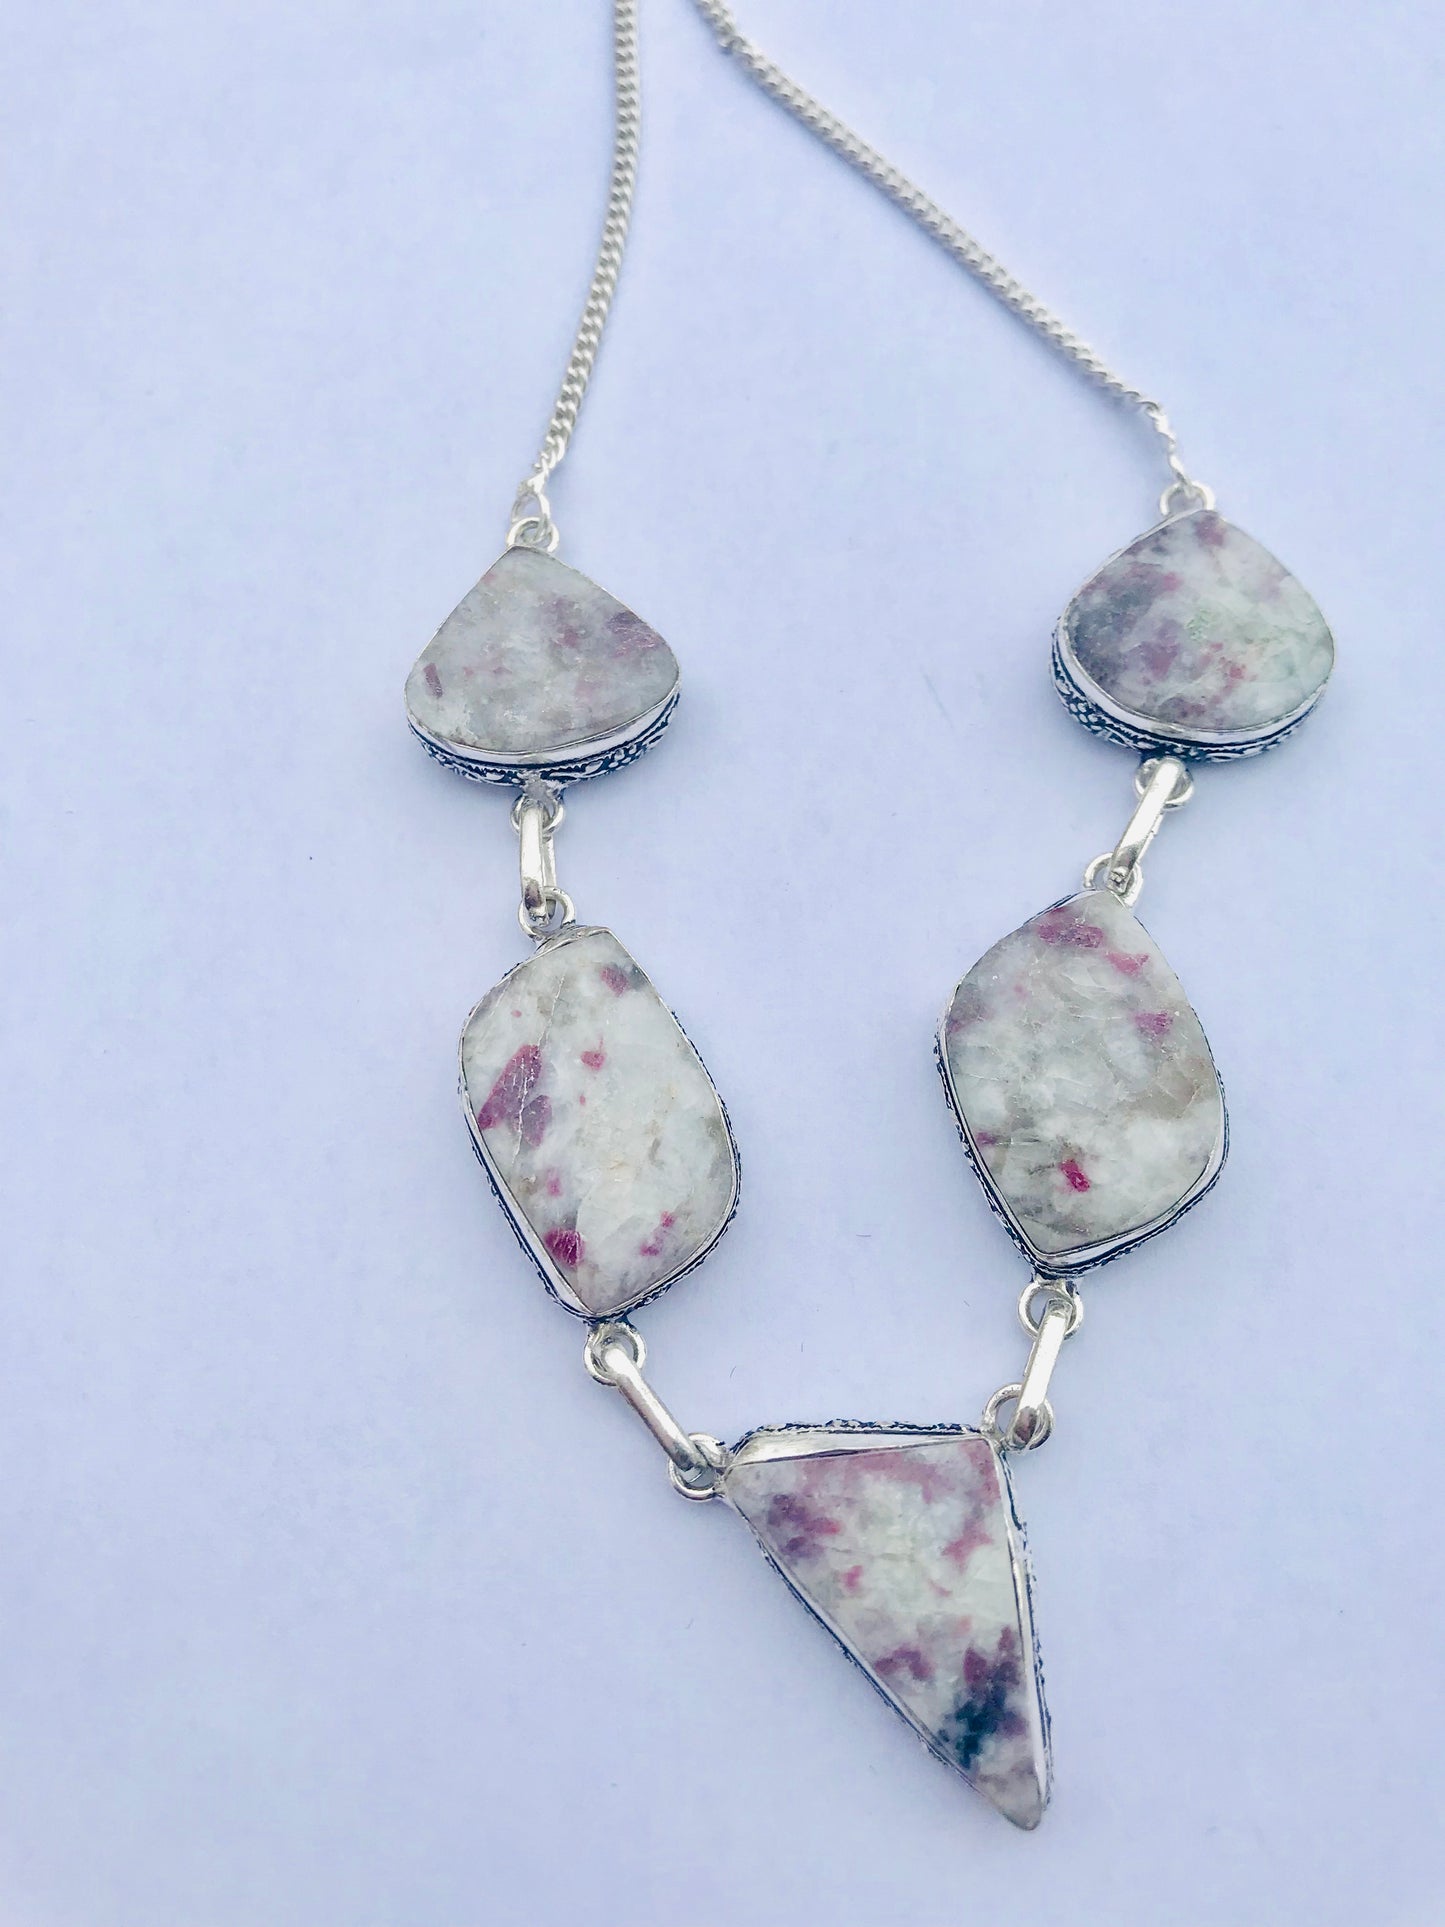 Tourmaline in Quartz Crystal Necklace - Happiness - Crystal Boutique.co.uk 